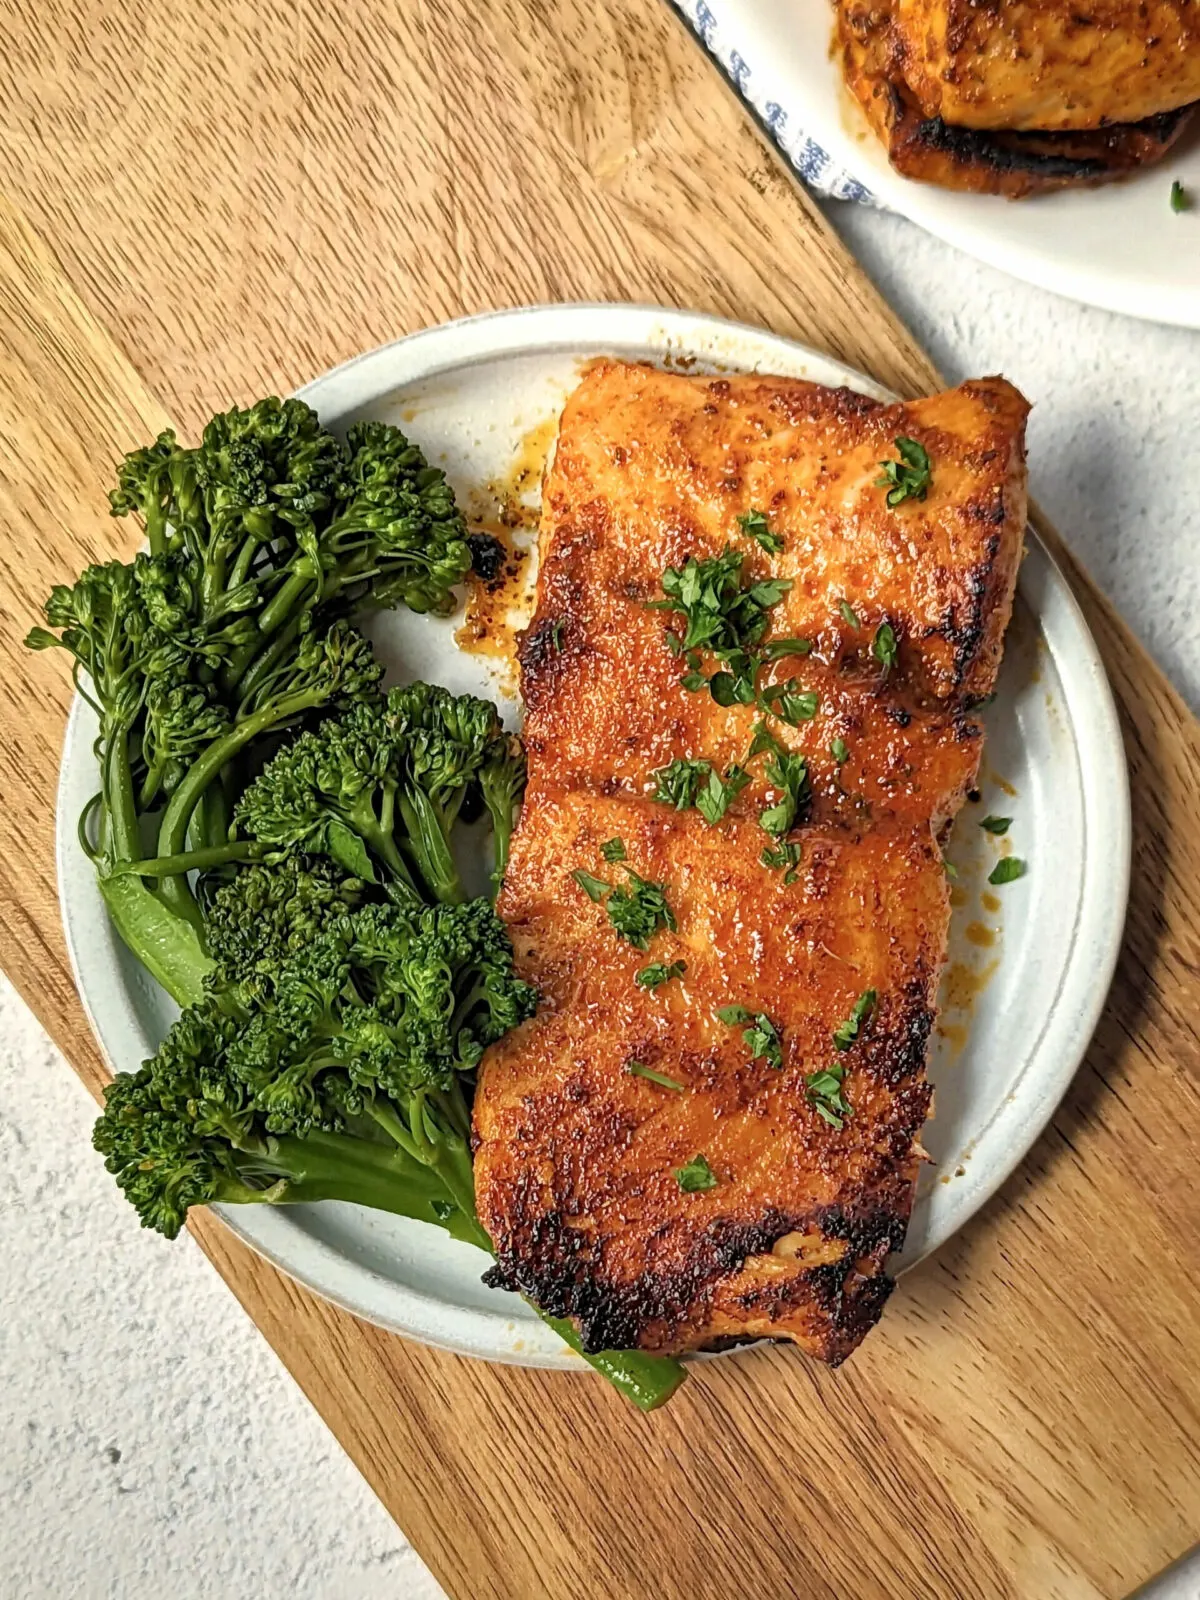 Cajun honey butter salmon on a plate with broccolini.